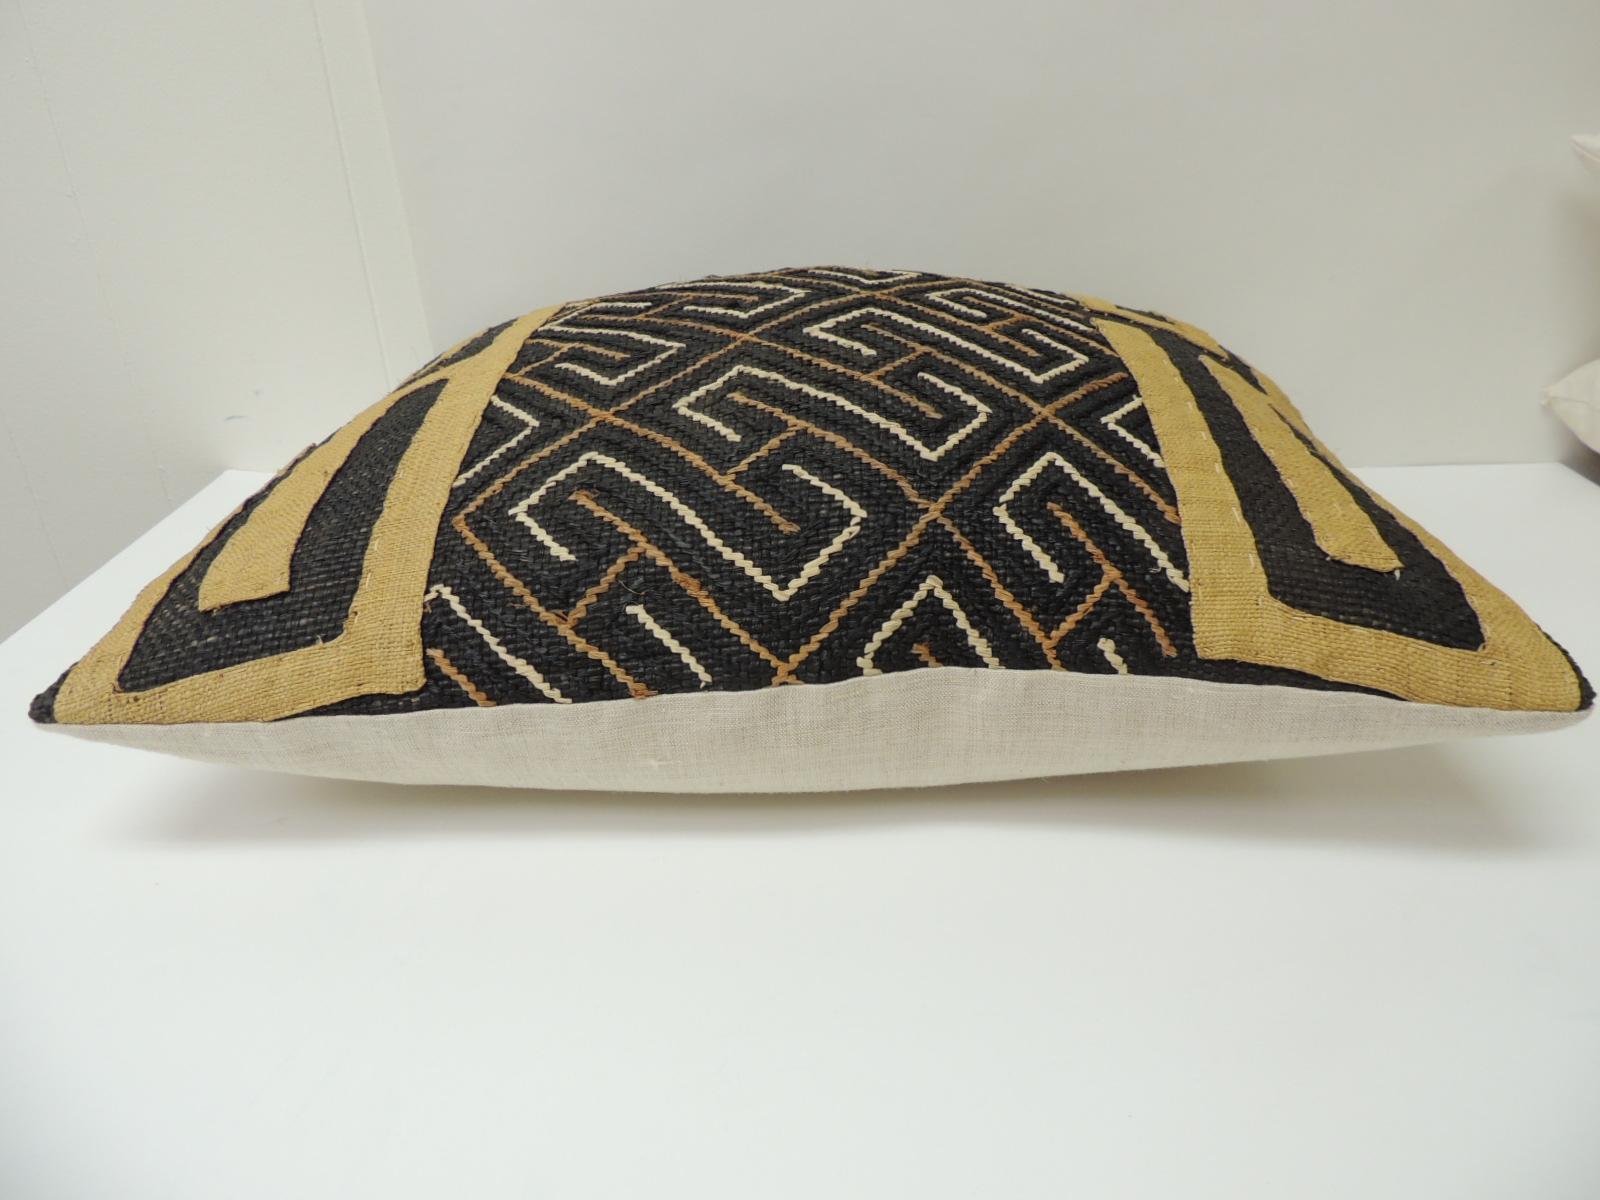 Hand-Crafted Vintage Yellow and Black African Kuba Embroidered Decorative Bolster Pillow